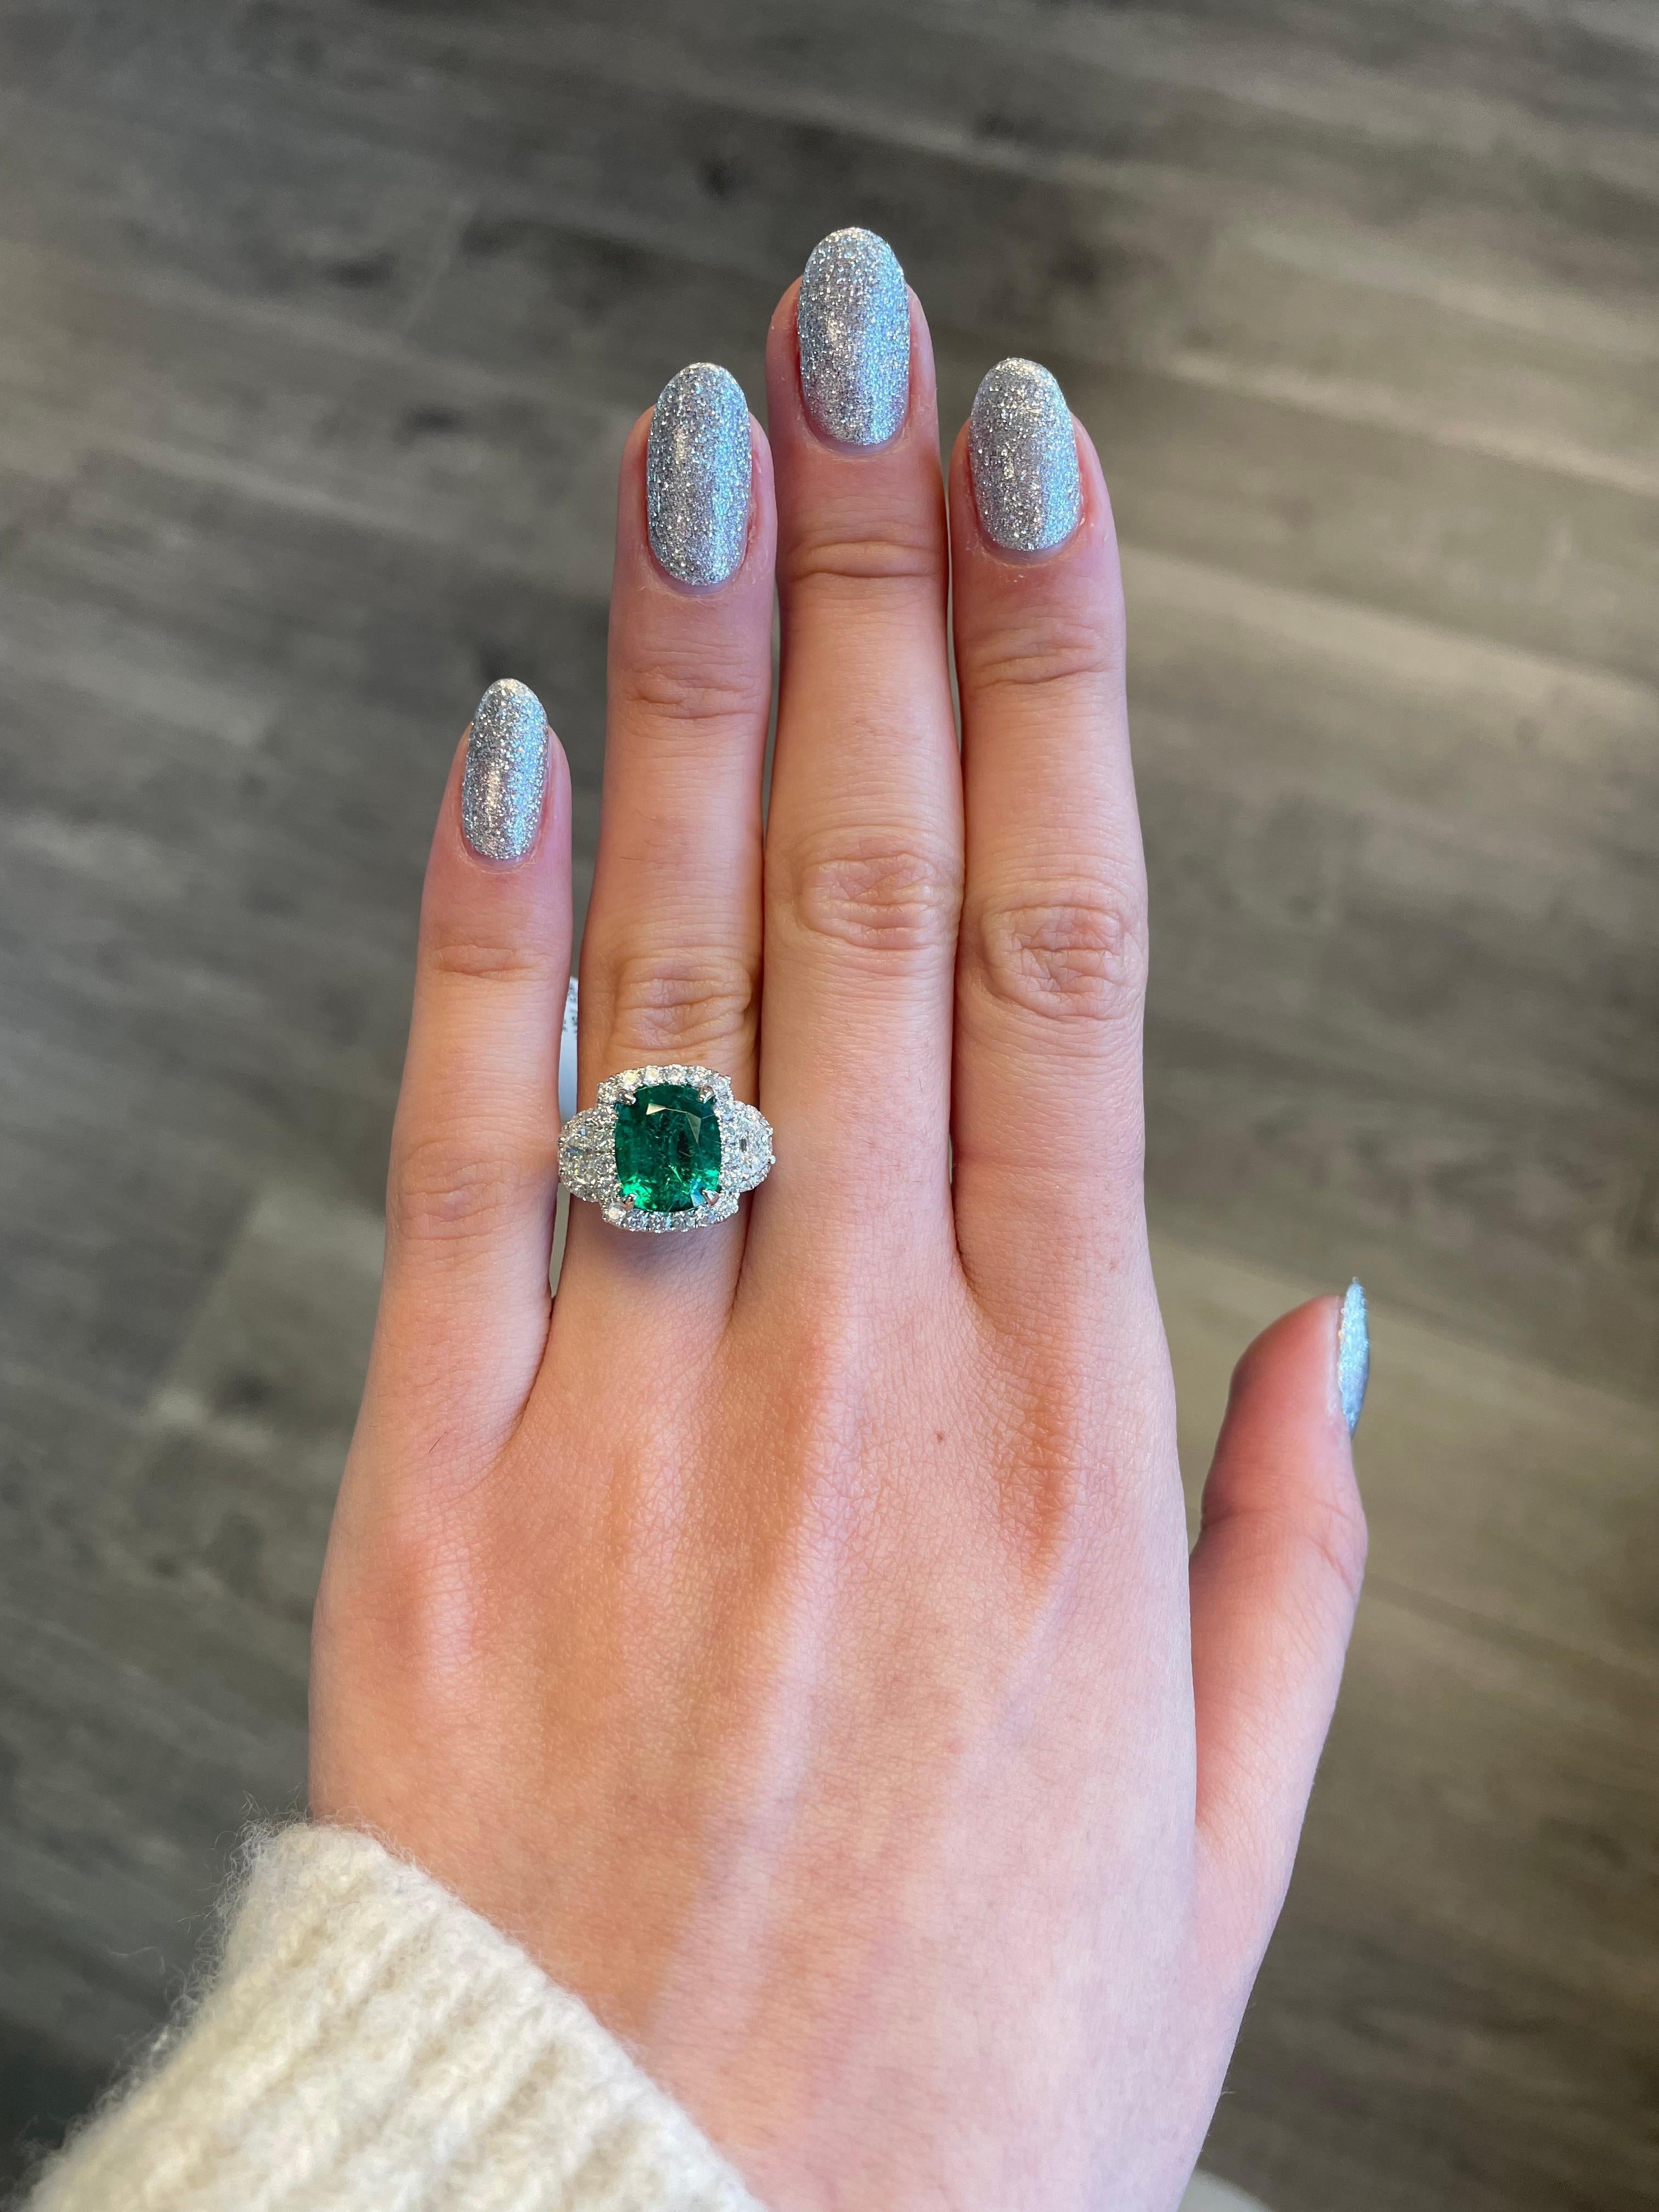 Stunning emerald and diamond three stone ring with halo. 
4.97 carats total gemstone weight.
3.63 carat cushion emerald, apx F2. 2 half moons with 58 round brilliant diamonds, 1.34 carats. Approximately G/H color and VS-SI clarity. 18k white gold,